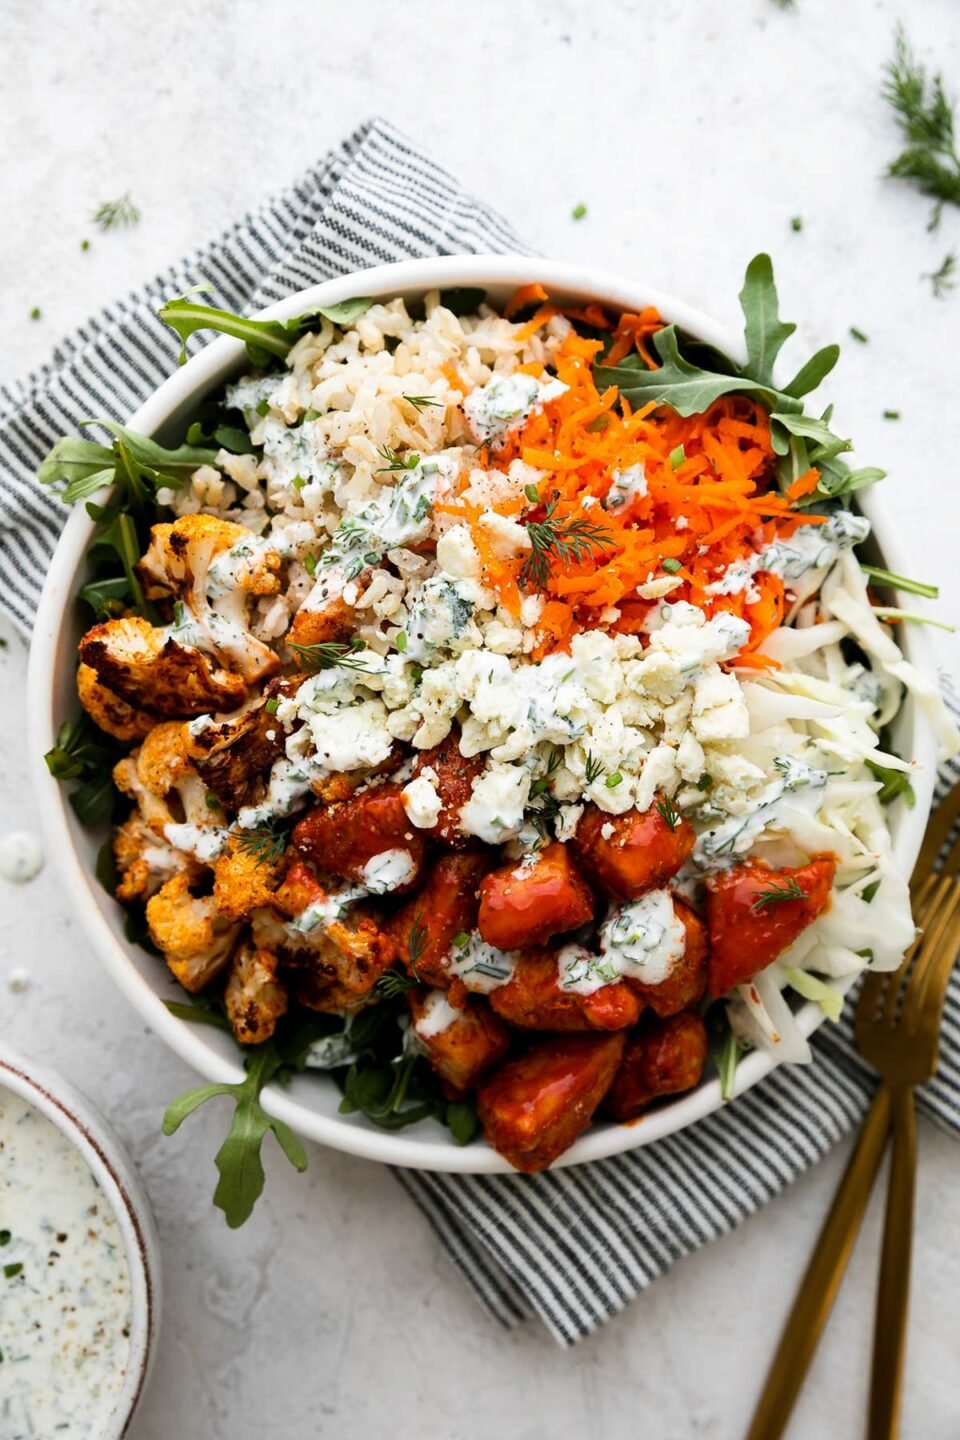 An overhead shot of an assembled & finished Hearty Buffalo Chicken bowl. The bowl is made with cooked brown rice, a bed of arugula, finely shredded cabbage, easy skillet buffalo chicken, roasted cauliflower, grated carrots, cheese, and herby ranch yogurt drizzle over top. The bowls sits atop a creamy white textured surface with a blue and white striped linen napkin resting underneath. Two gold forks, a small ceramic bowl filled with herby ranch yogurt drizzle with a gold spoon resting inside the bowl, freshly snipped chives, and loose fresh dill surround the bowl.